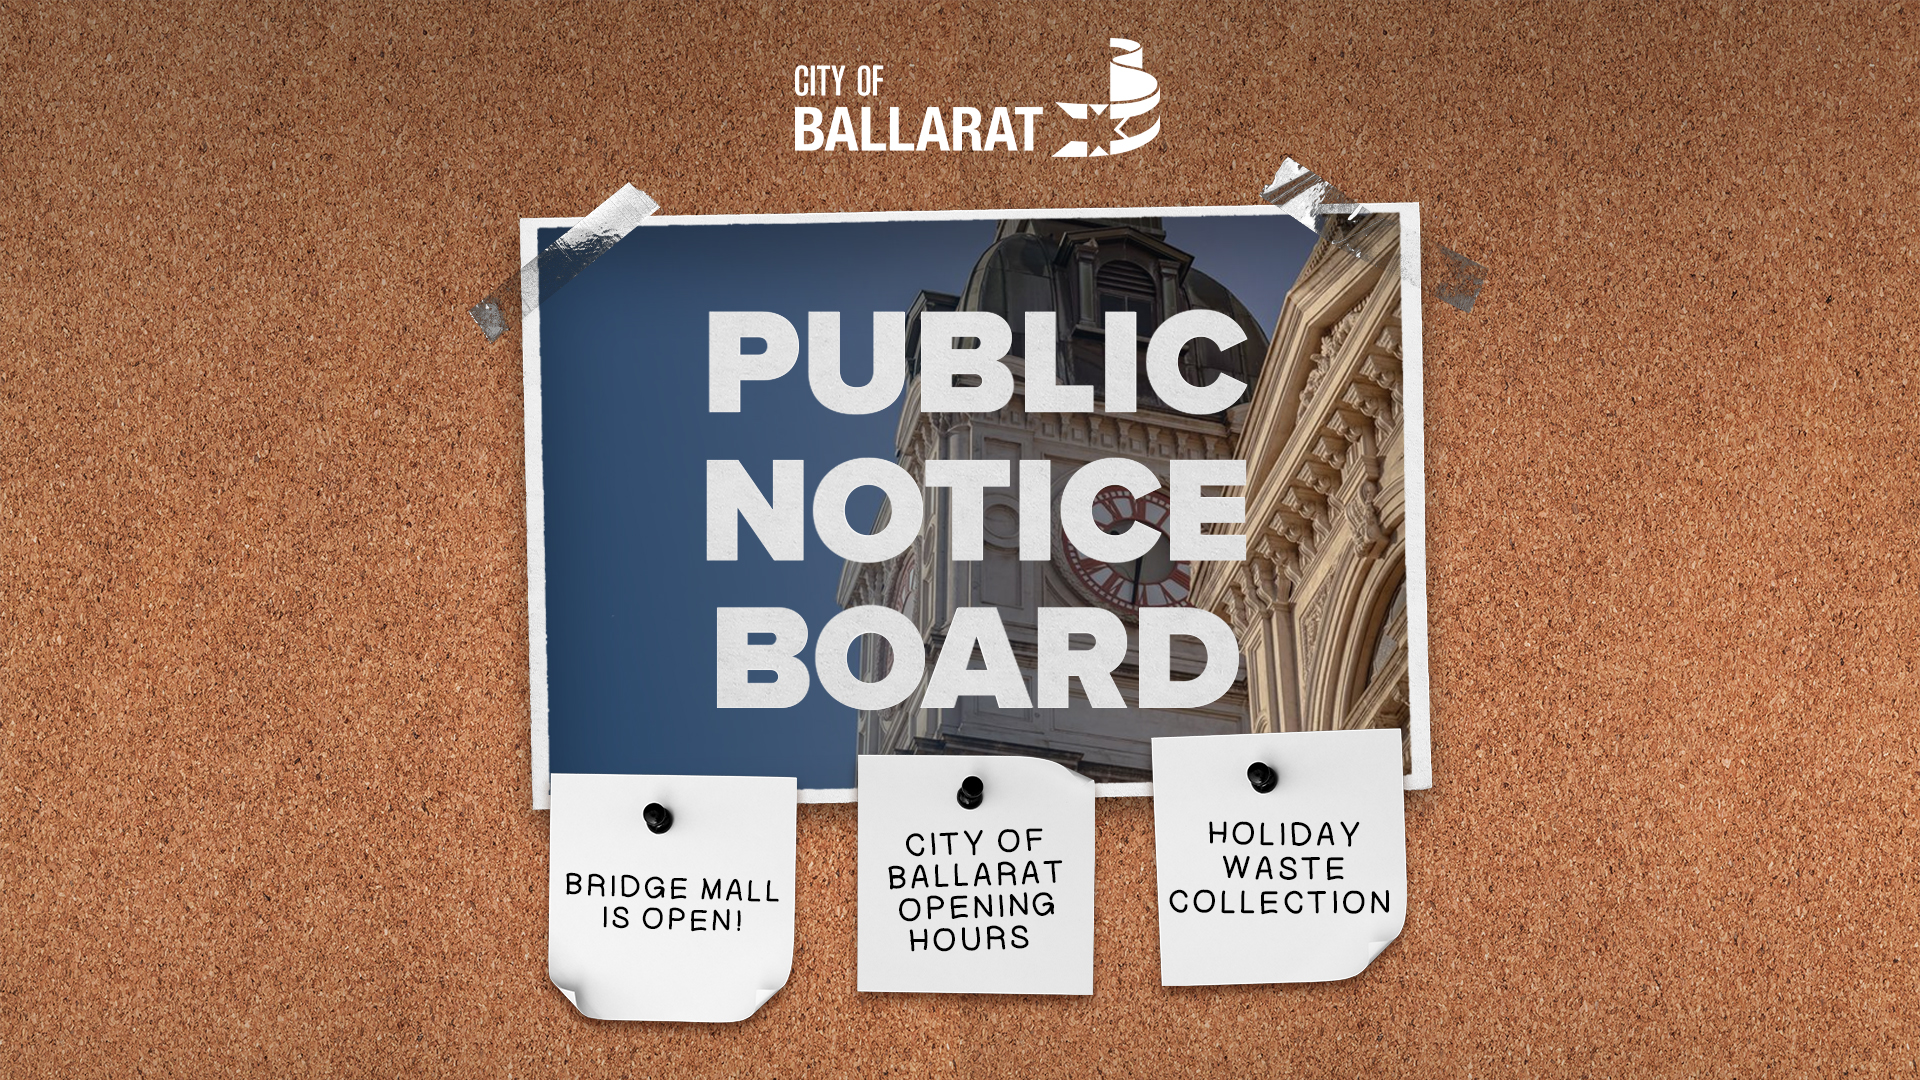 Notice board with Public Notice Board text over an image of Ballarat Town Hall. Three notes underneath with text saying BRIDGE MALL IS OPEN!, CITY OF BALLARAT OPENING HOURS, HOLIDAY WASTE COLLECTION